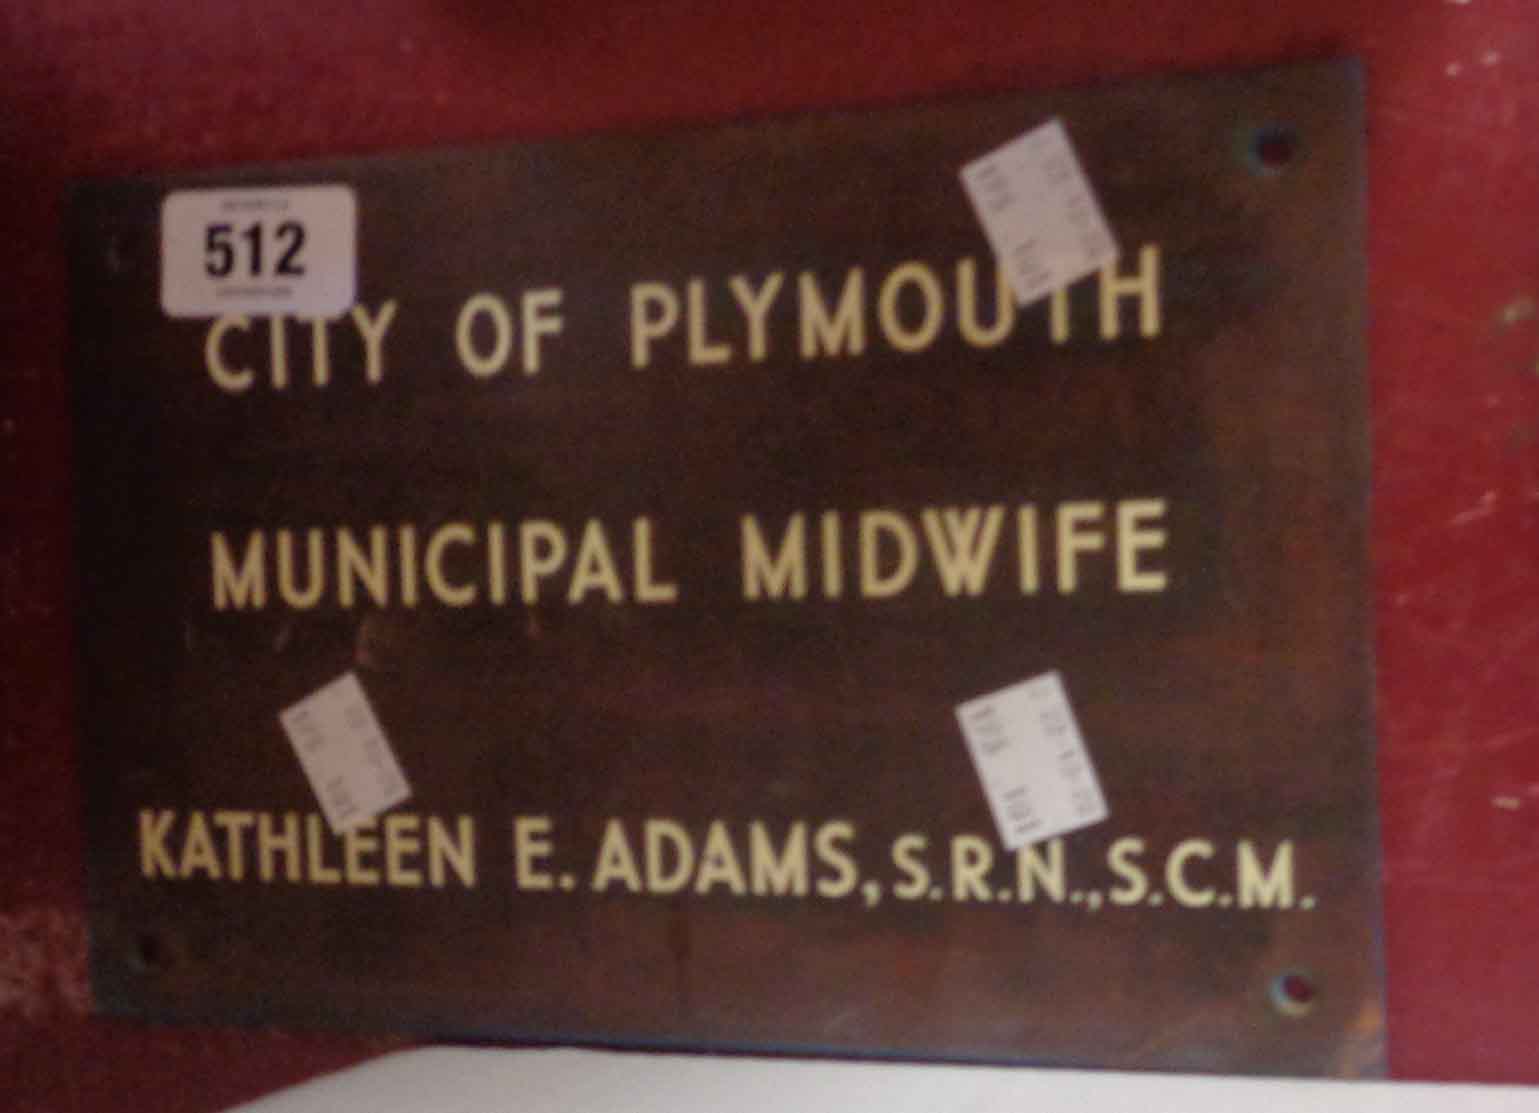 A vintage copper door plaque with inset enamel lettering City of Plymouth Municipal Midwife